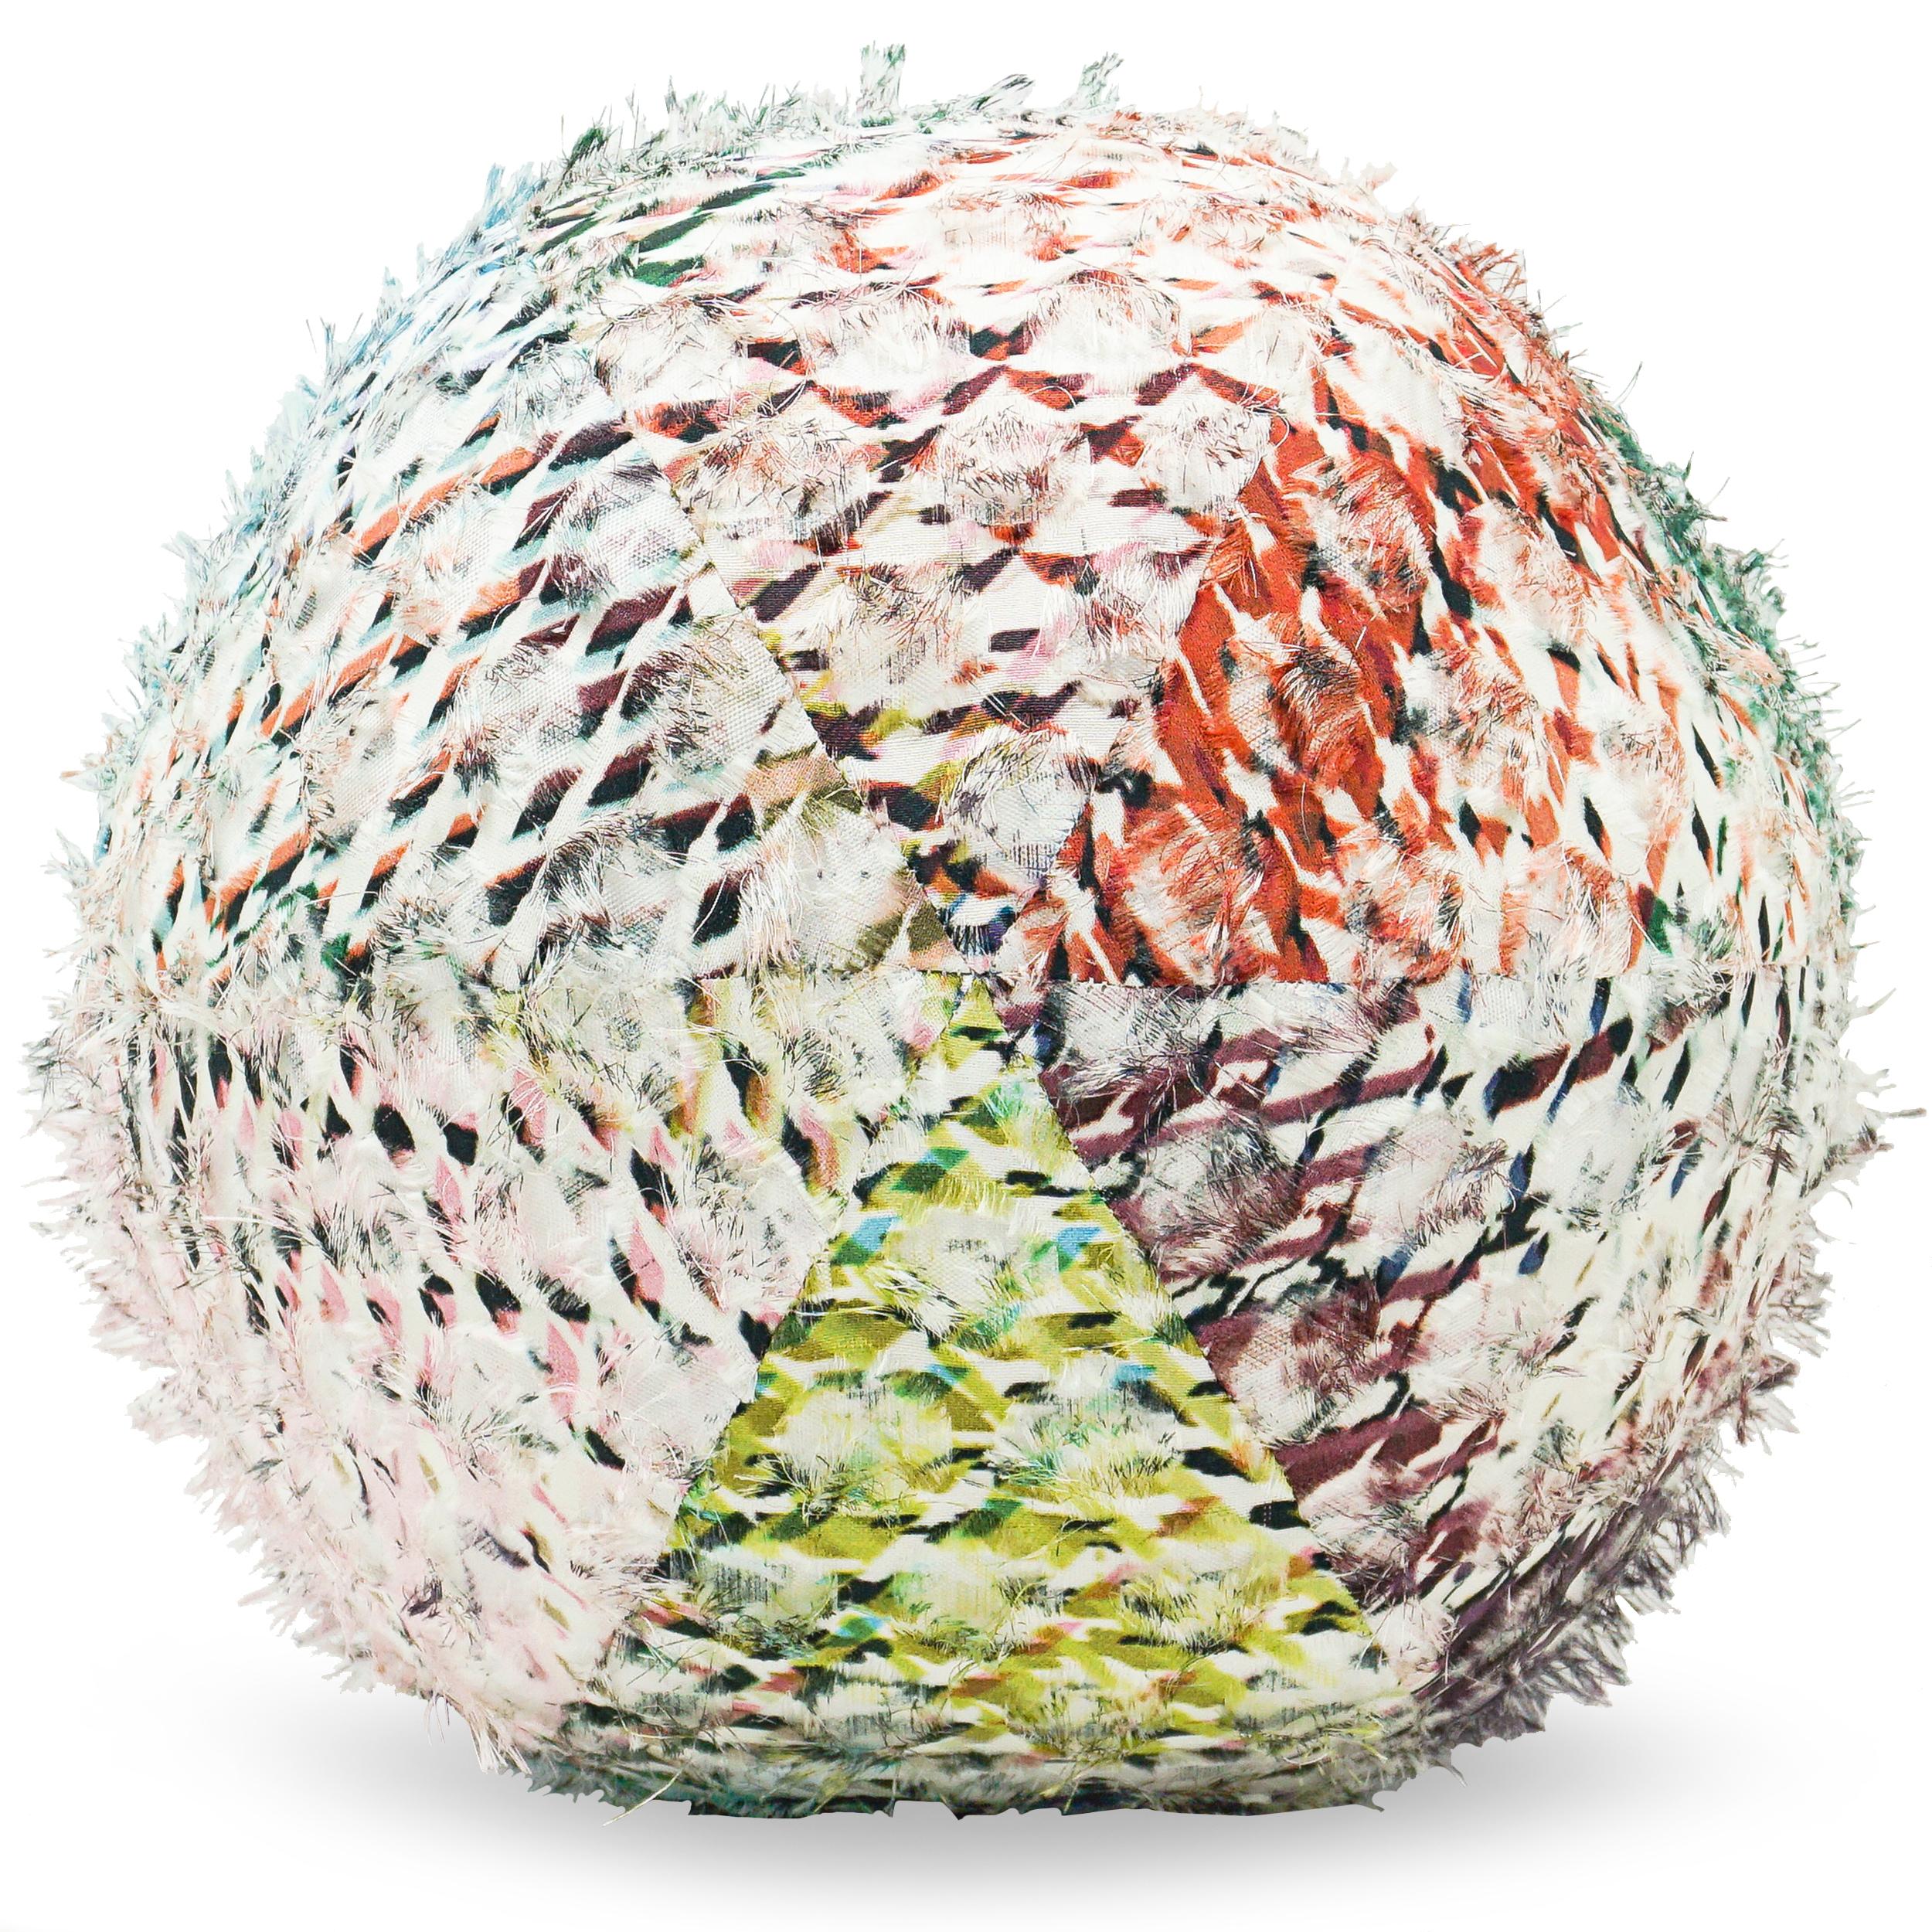 Ball pillow is covered in a colorful Romo fabric with wispy fringe detail giving it a playful appearance, texture and a 3-Dimensional effect. Can be customized in any fabric. Ask for current availability of ball in fabric as shown.